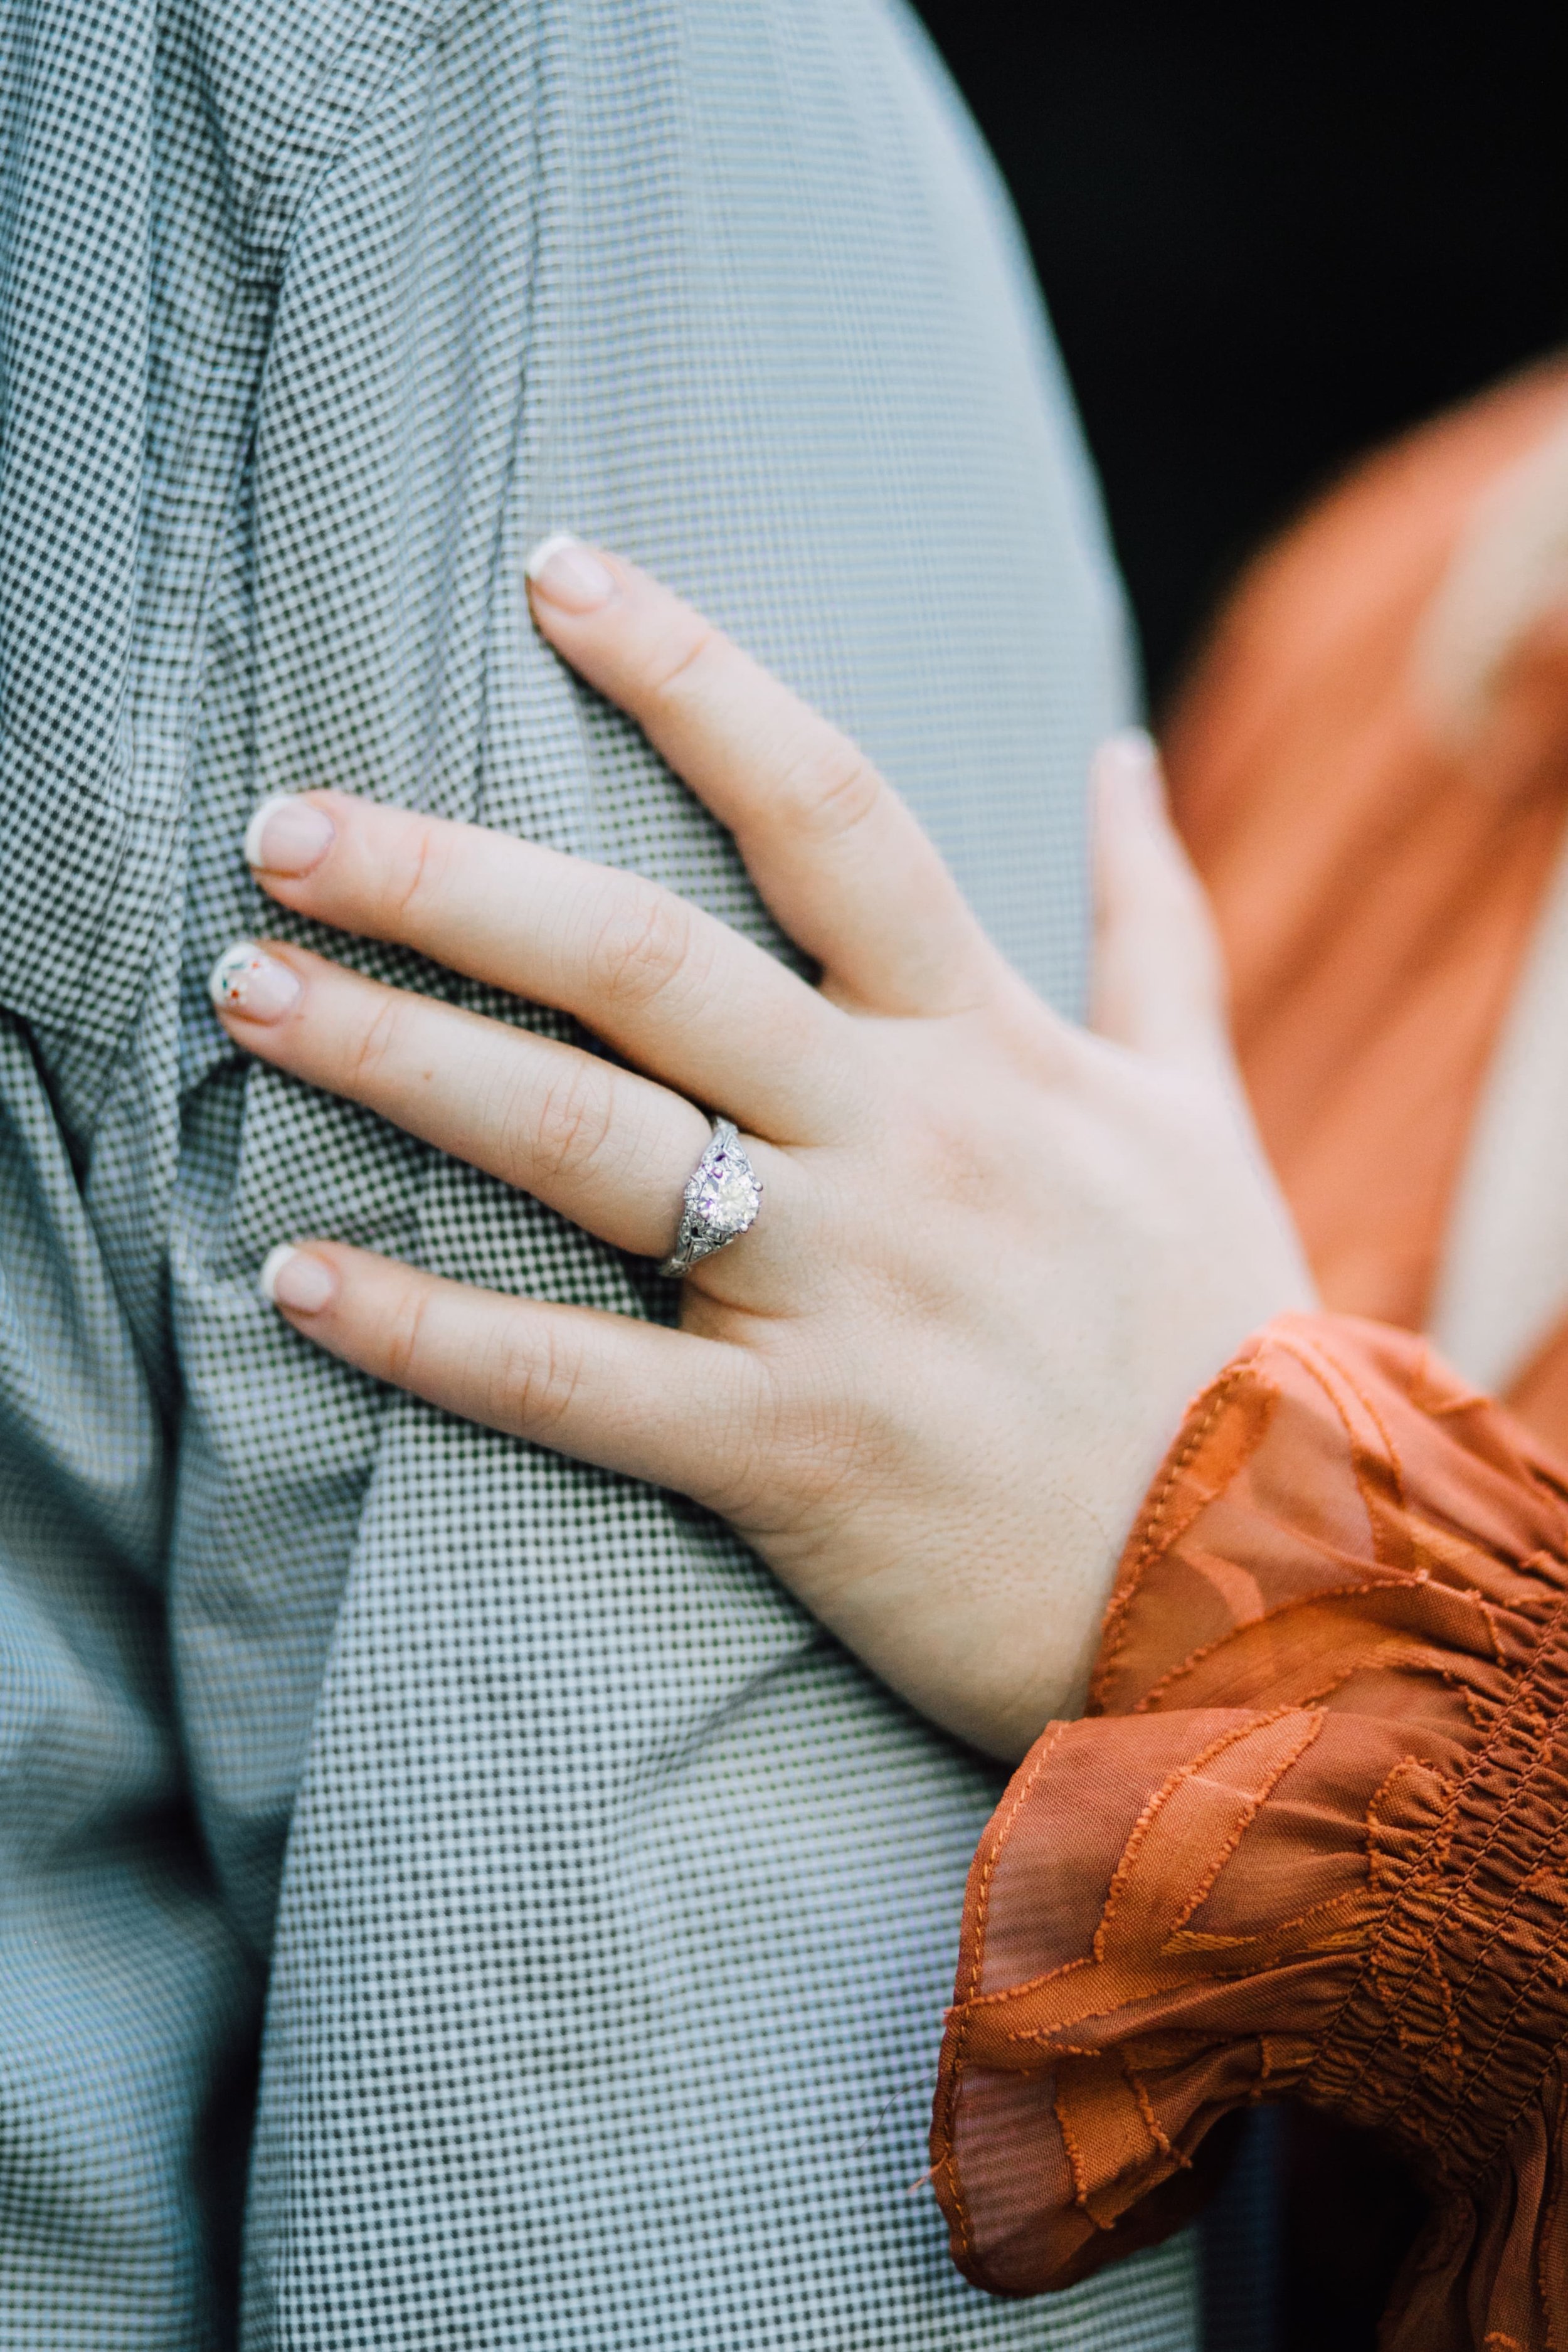  brittany rests her hand on patrick’s arm to show her engagement ring for central ny engagement photography 